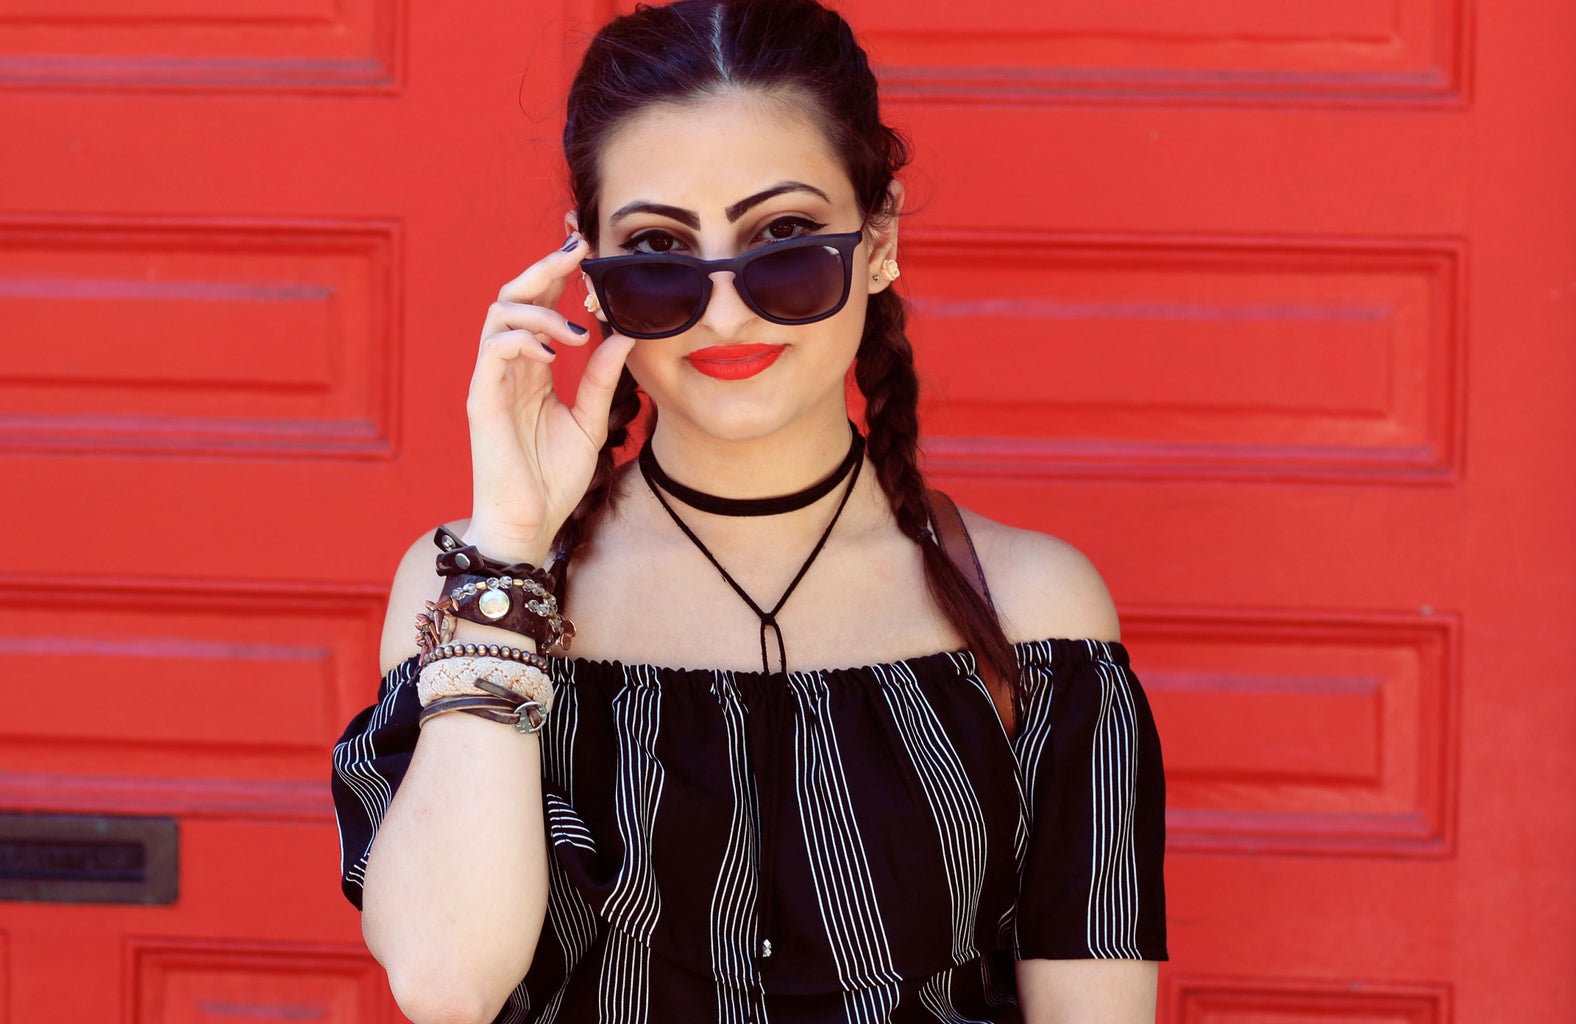 Girl With Sunglasses With Red Wall